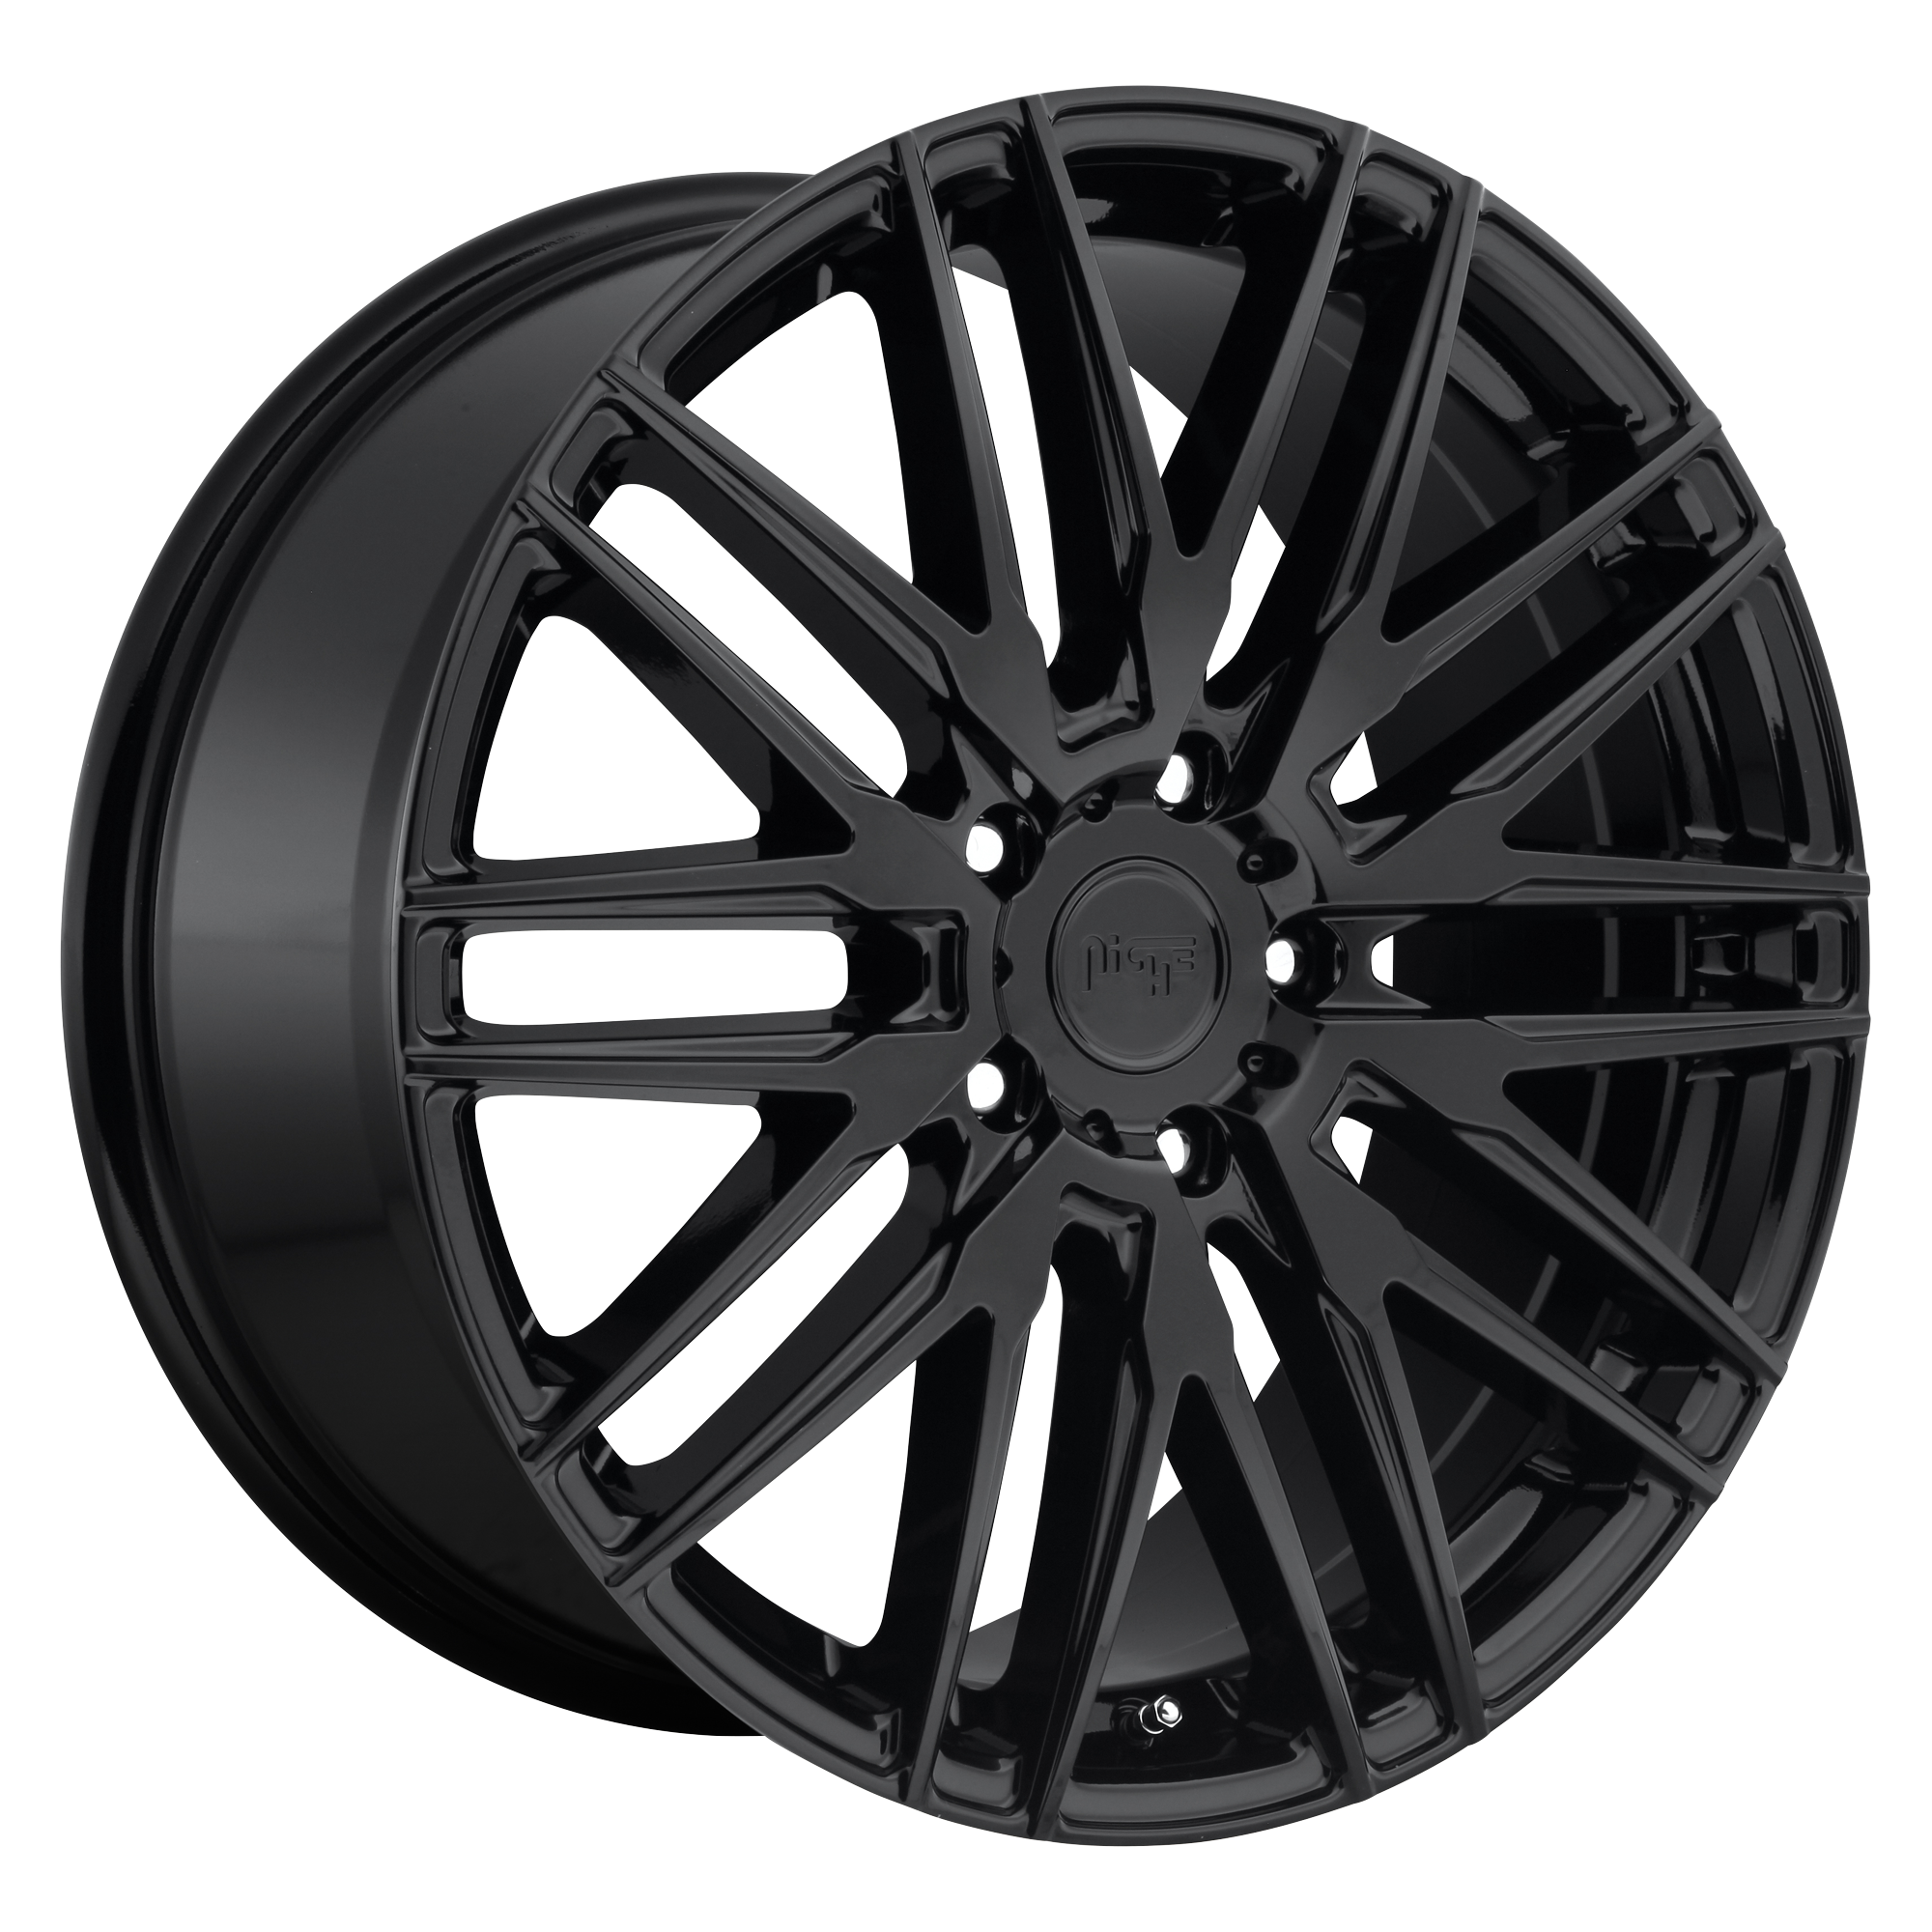 ANZIO 22x10.5 5x130.00 GLOSS BLACK (55 mm) - Tires and Engine Performance